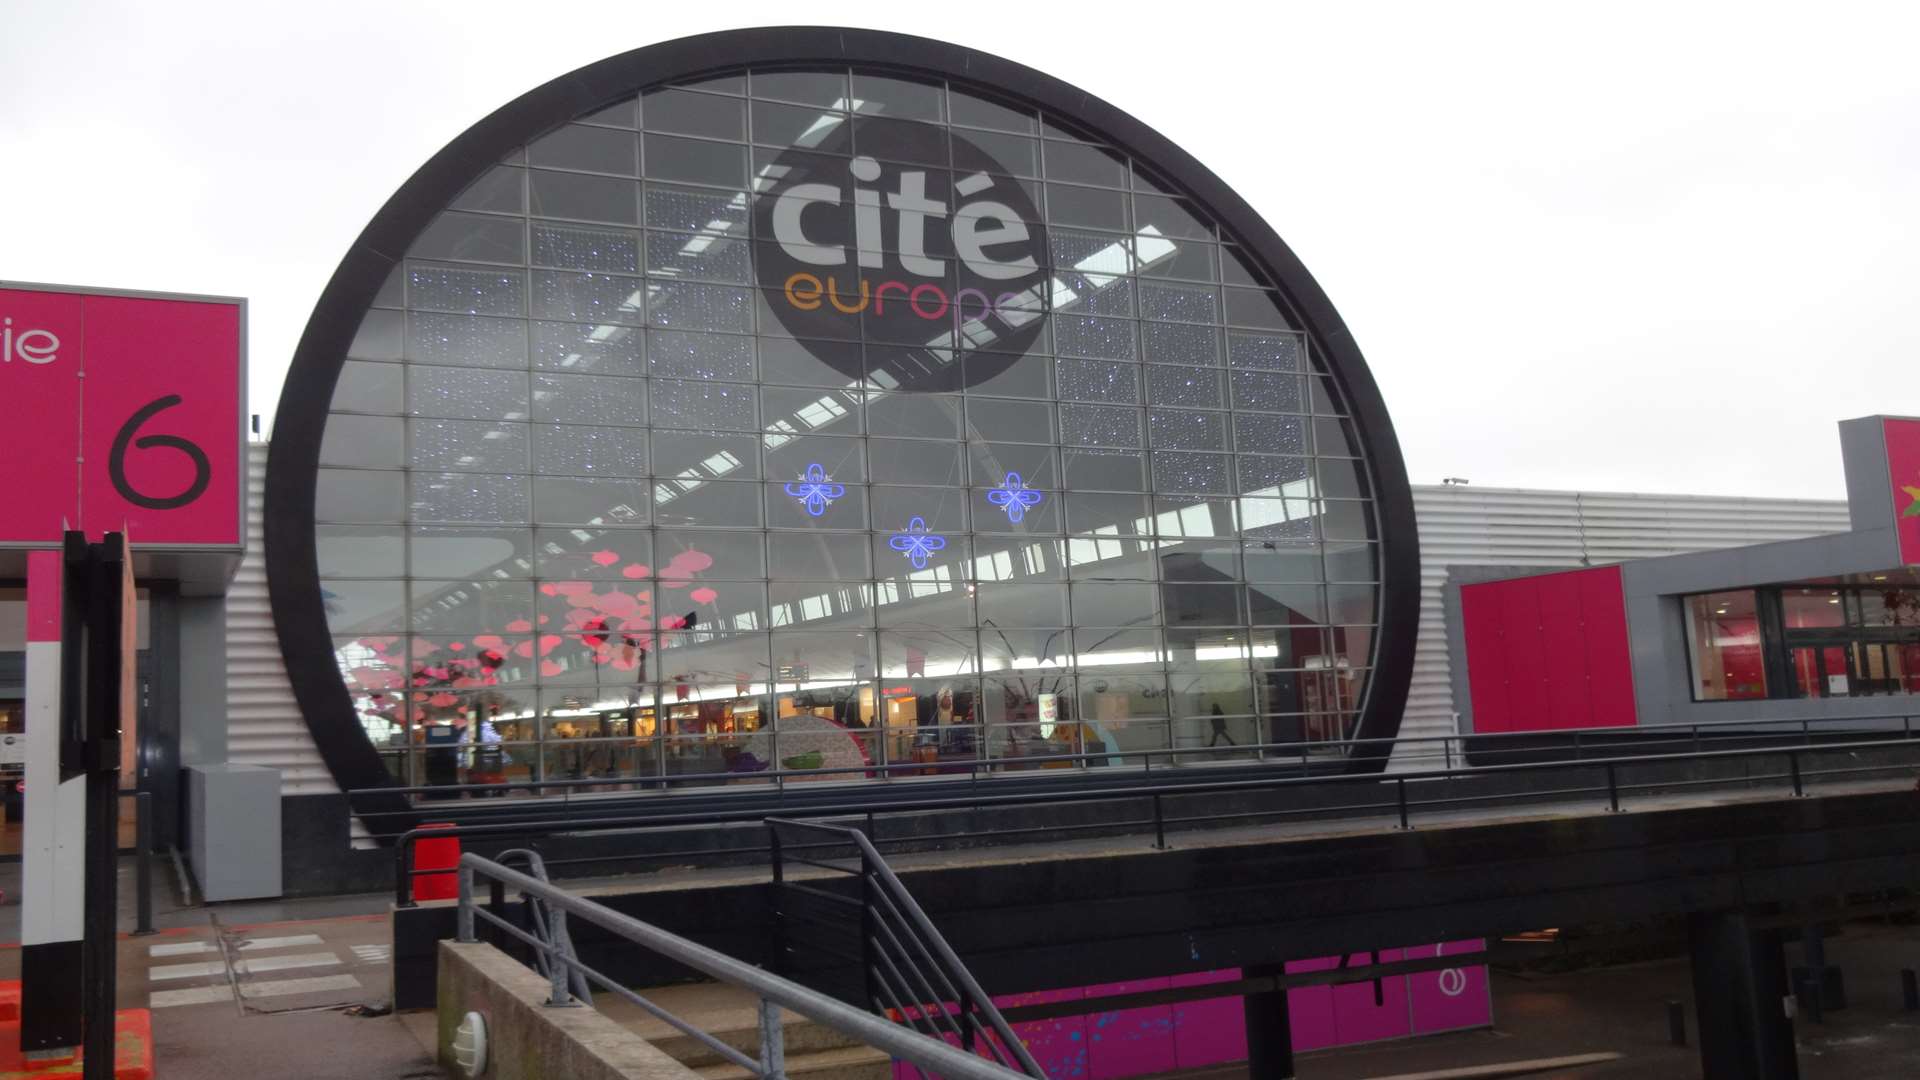 Cite Europe is just a two minute drive from the Eurotunnel terminal